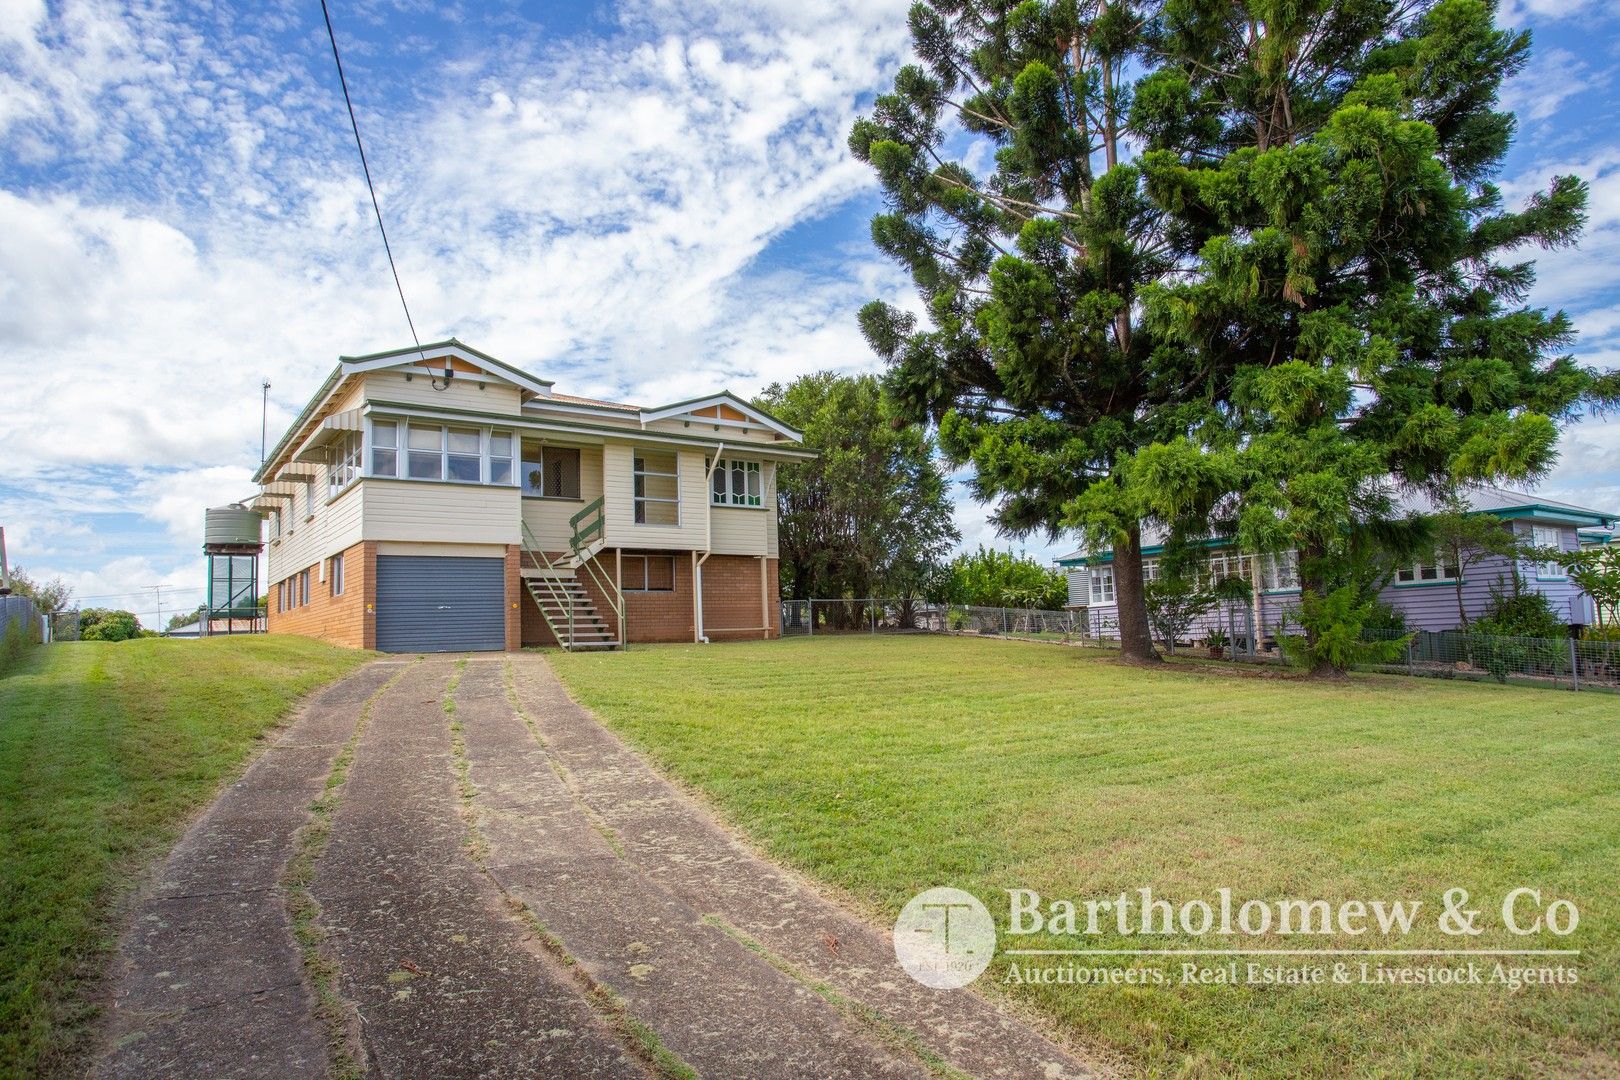 13 Golf Avenue, Boonah QLD 4310, Image 0